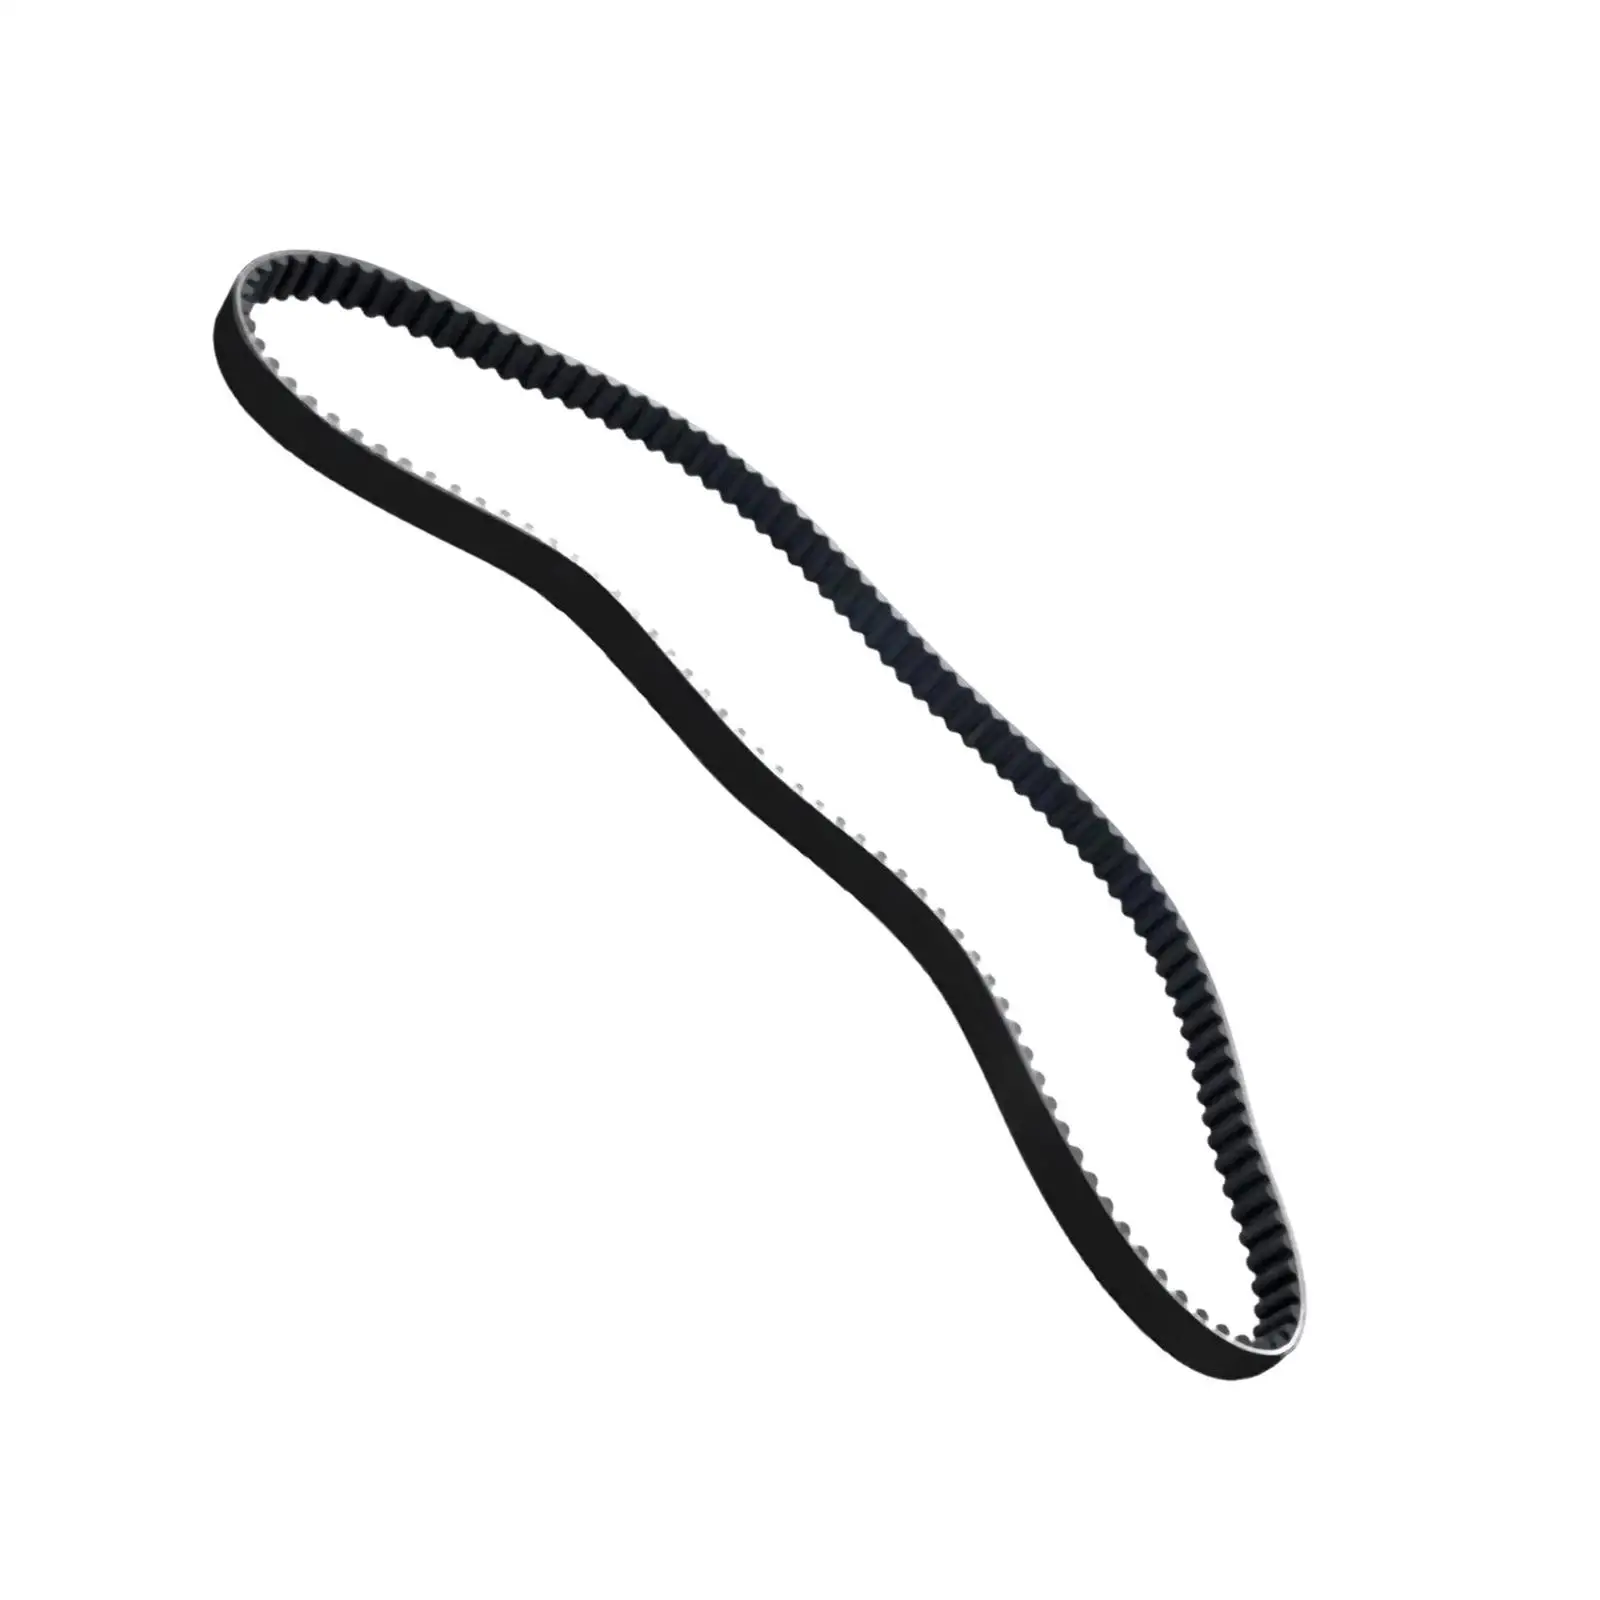 Rear Drive Belt 40001-85 Parabolic Tooth Profile Part for Harley-davidson